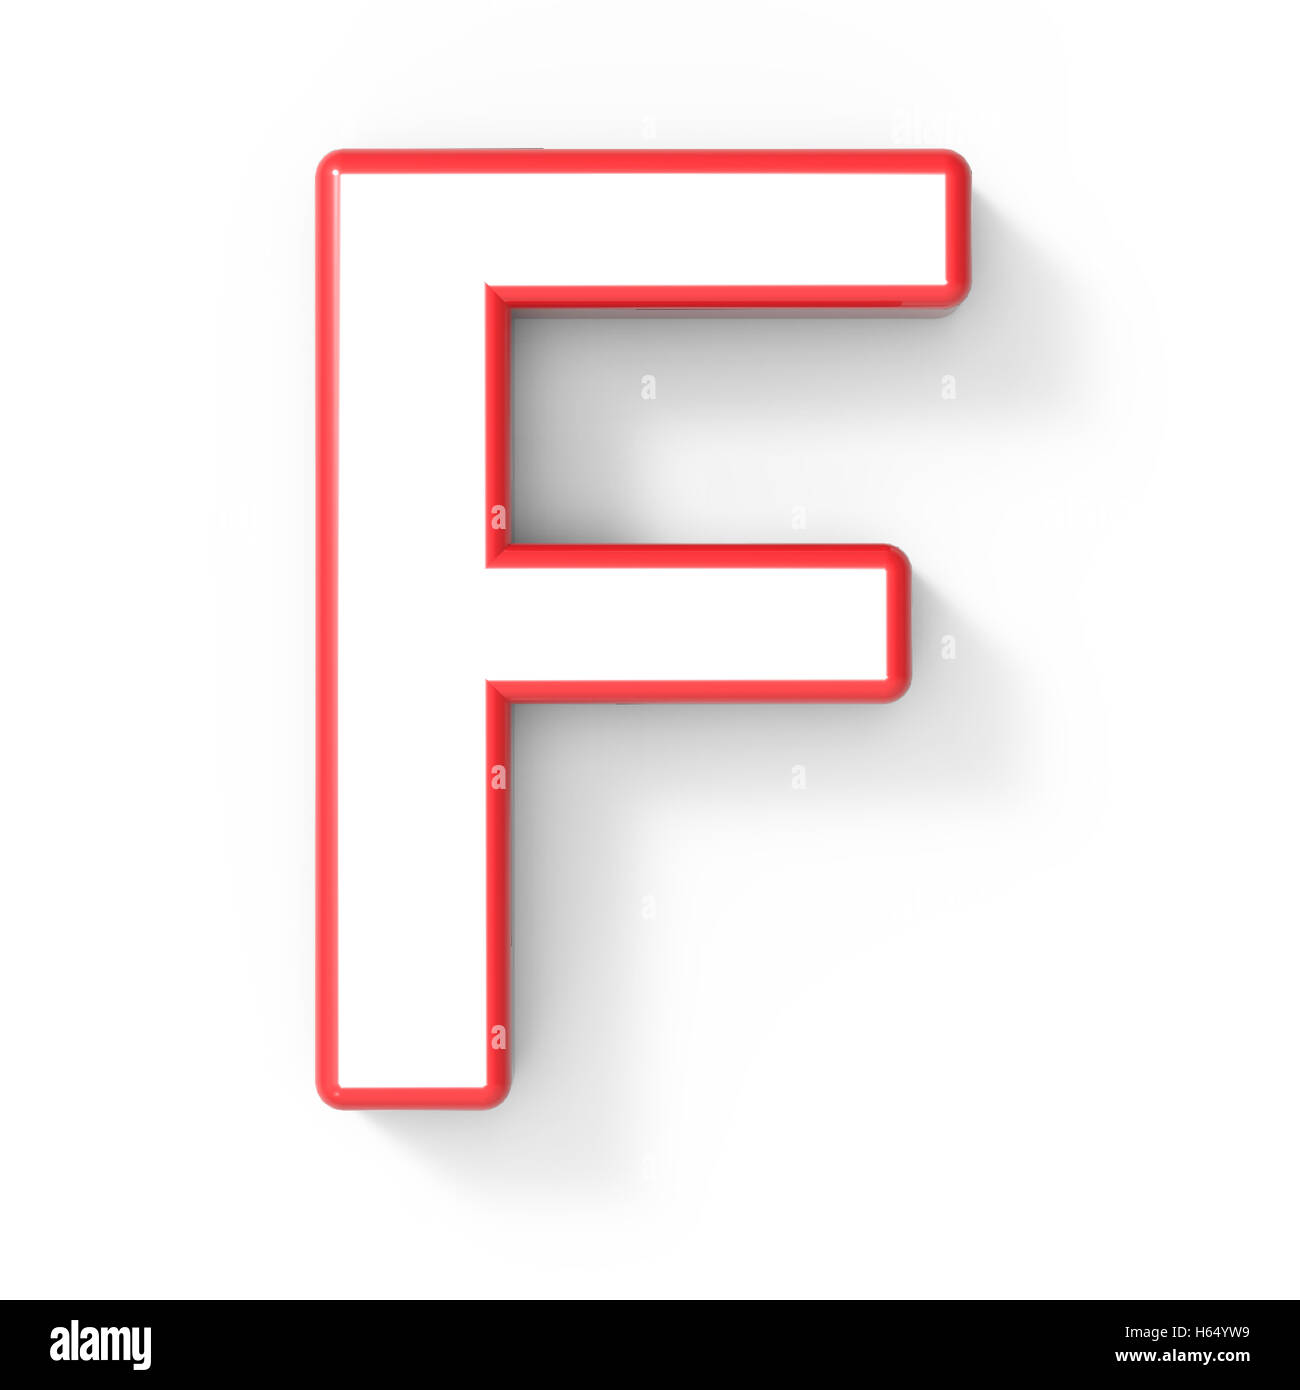 3d rendering white letter F with red frame isolated on white background, 3d illustration, top view Stock Photo